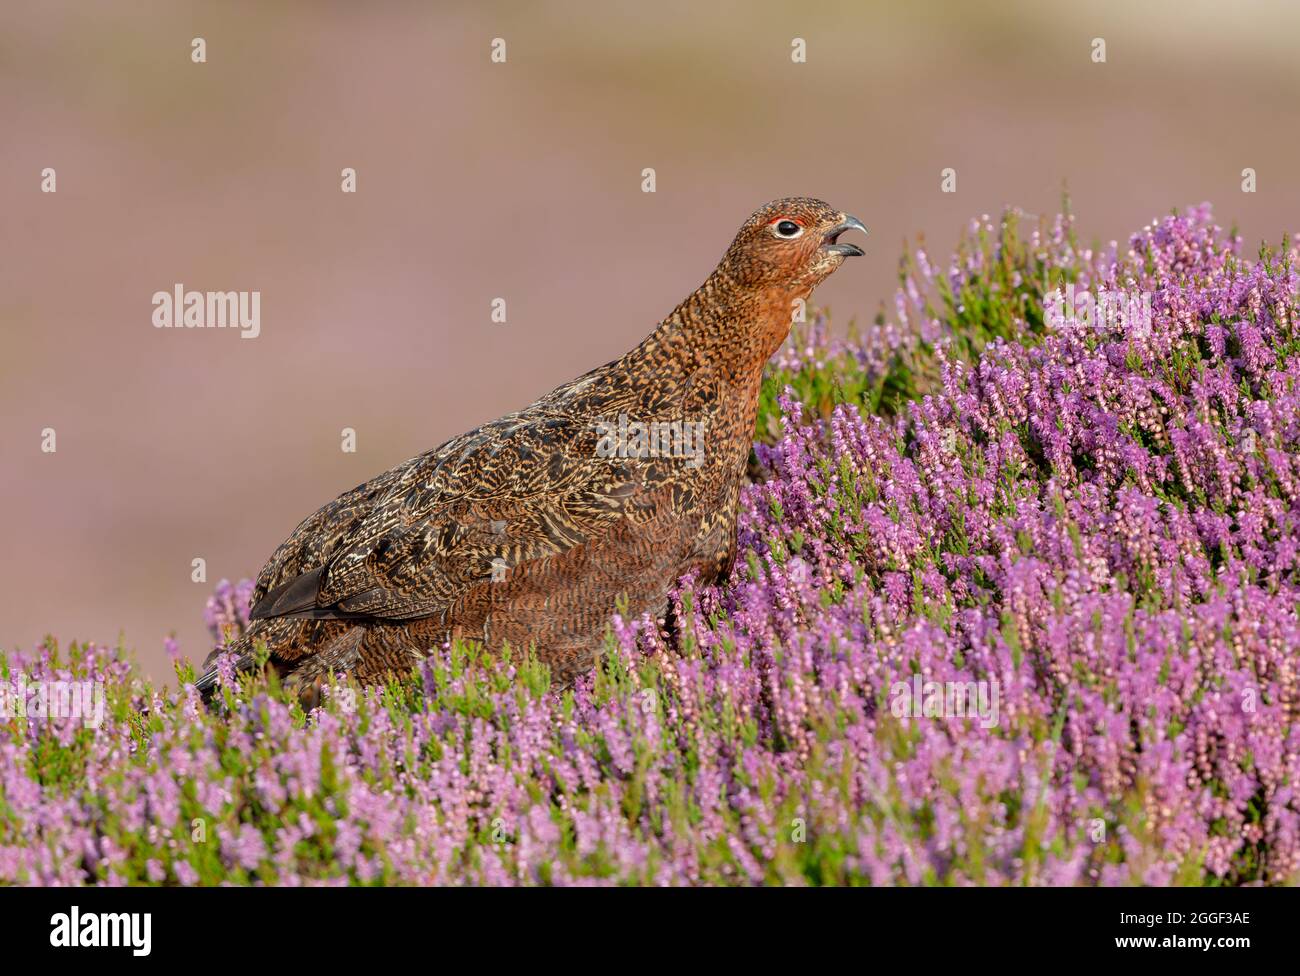 Red Grouse calling in blooming purple heather.  Summertime. Facing right.  Clean background with copy space.  Scientific name: Lagopus Lagopus. Stock Photo